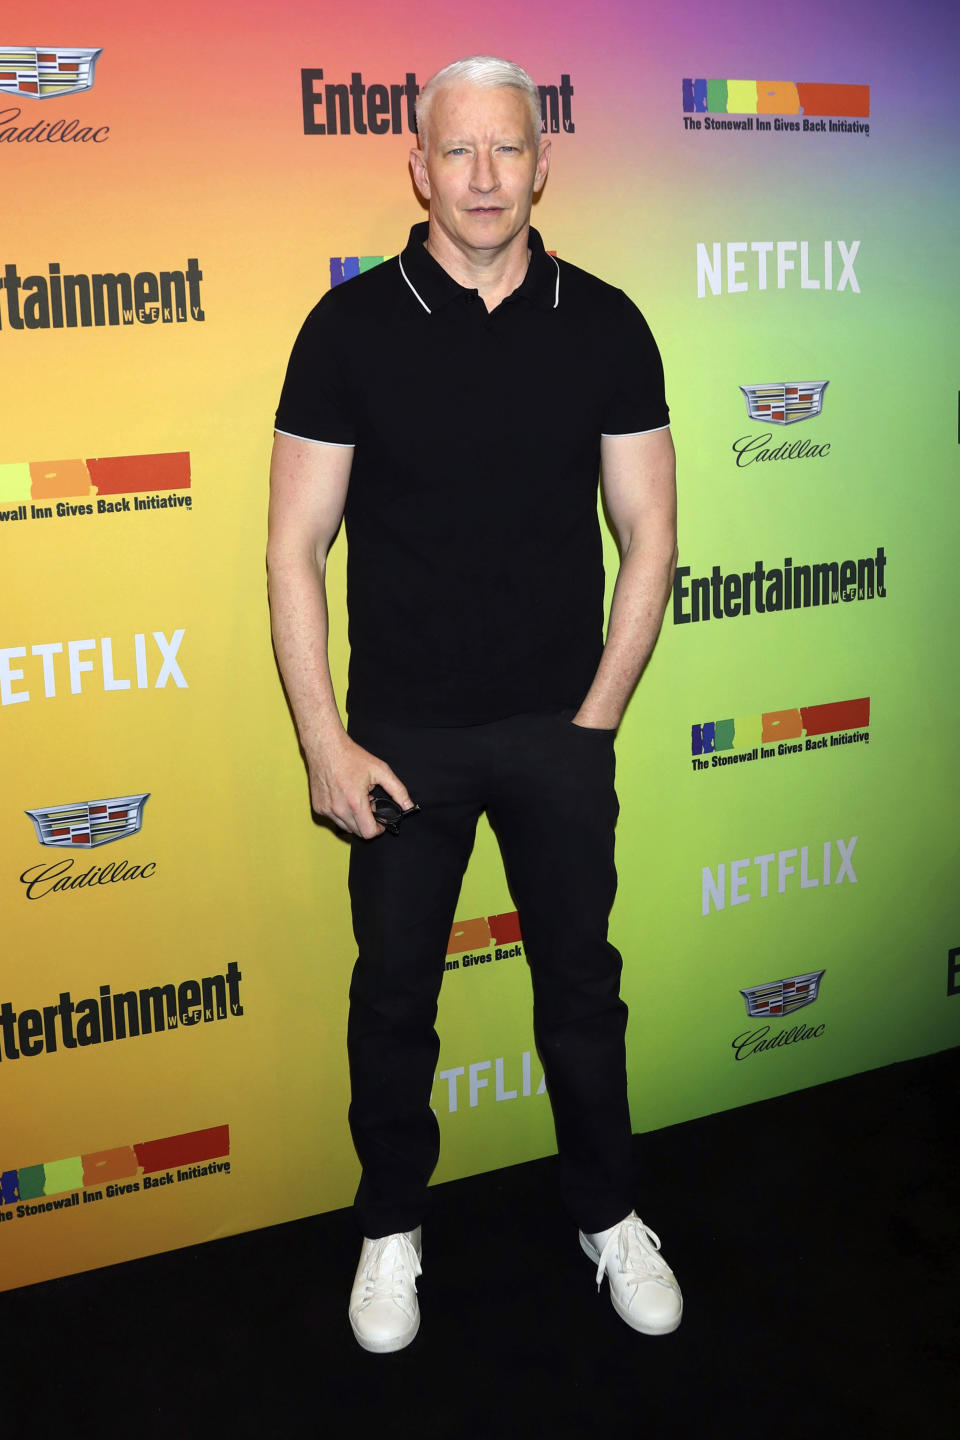 FILE - Anderson Cooper attends Entertainment Weekly's LGBTQ issue party at the Stonewall Inn June 5, 2019, in New York. Cooper turns 54 on June 3. (Photo by Greg Allen/Invision/AP, File)